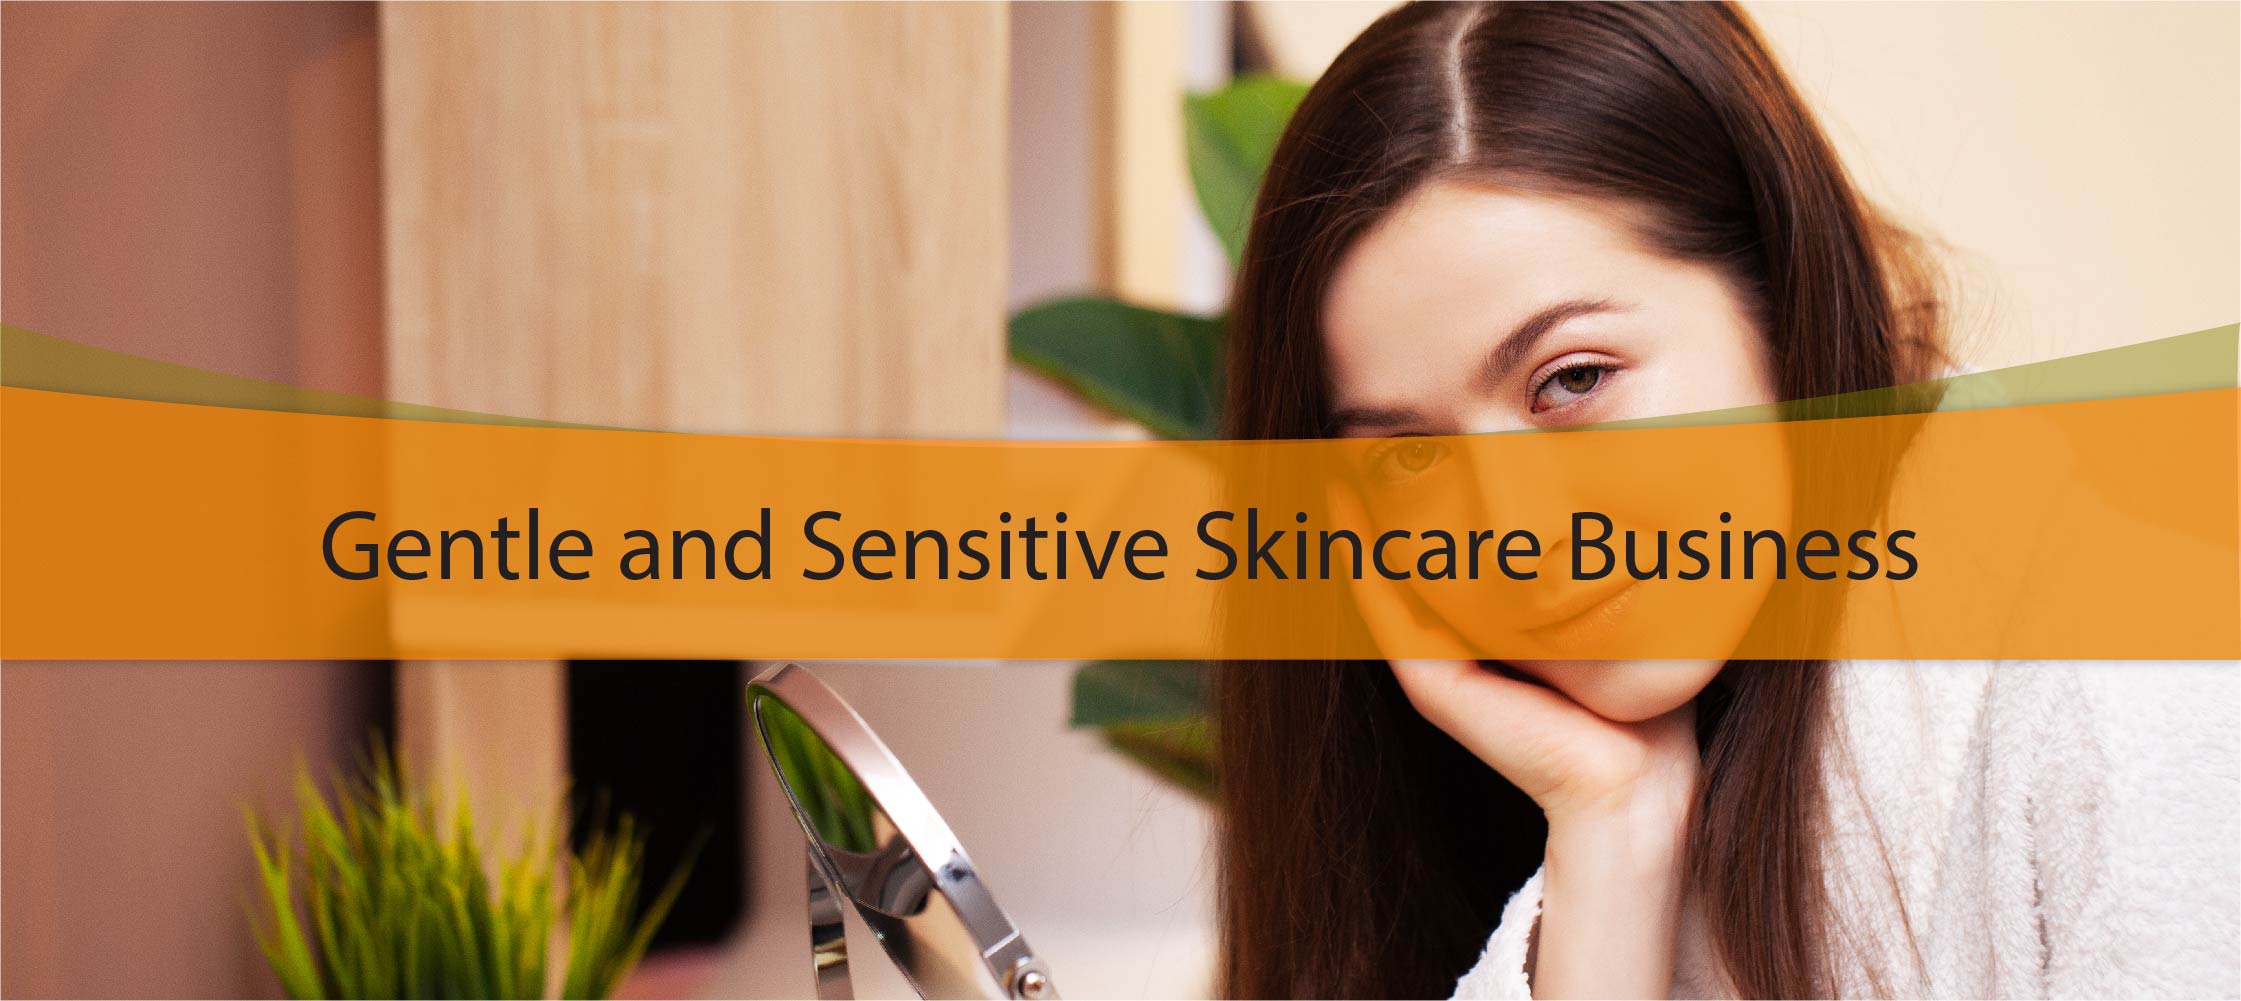 Gentle and Sensitive Skincare Business